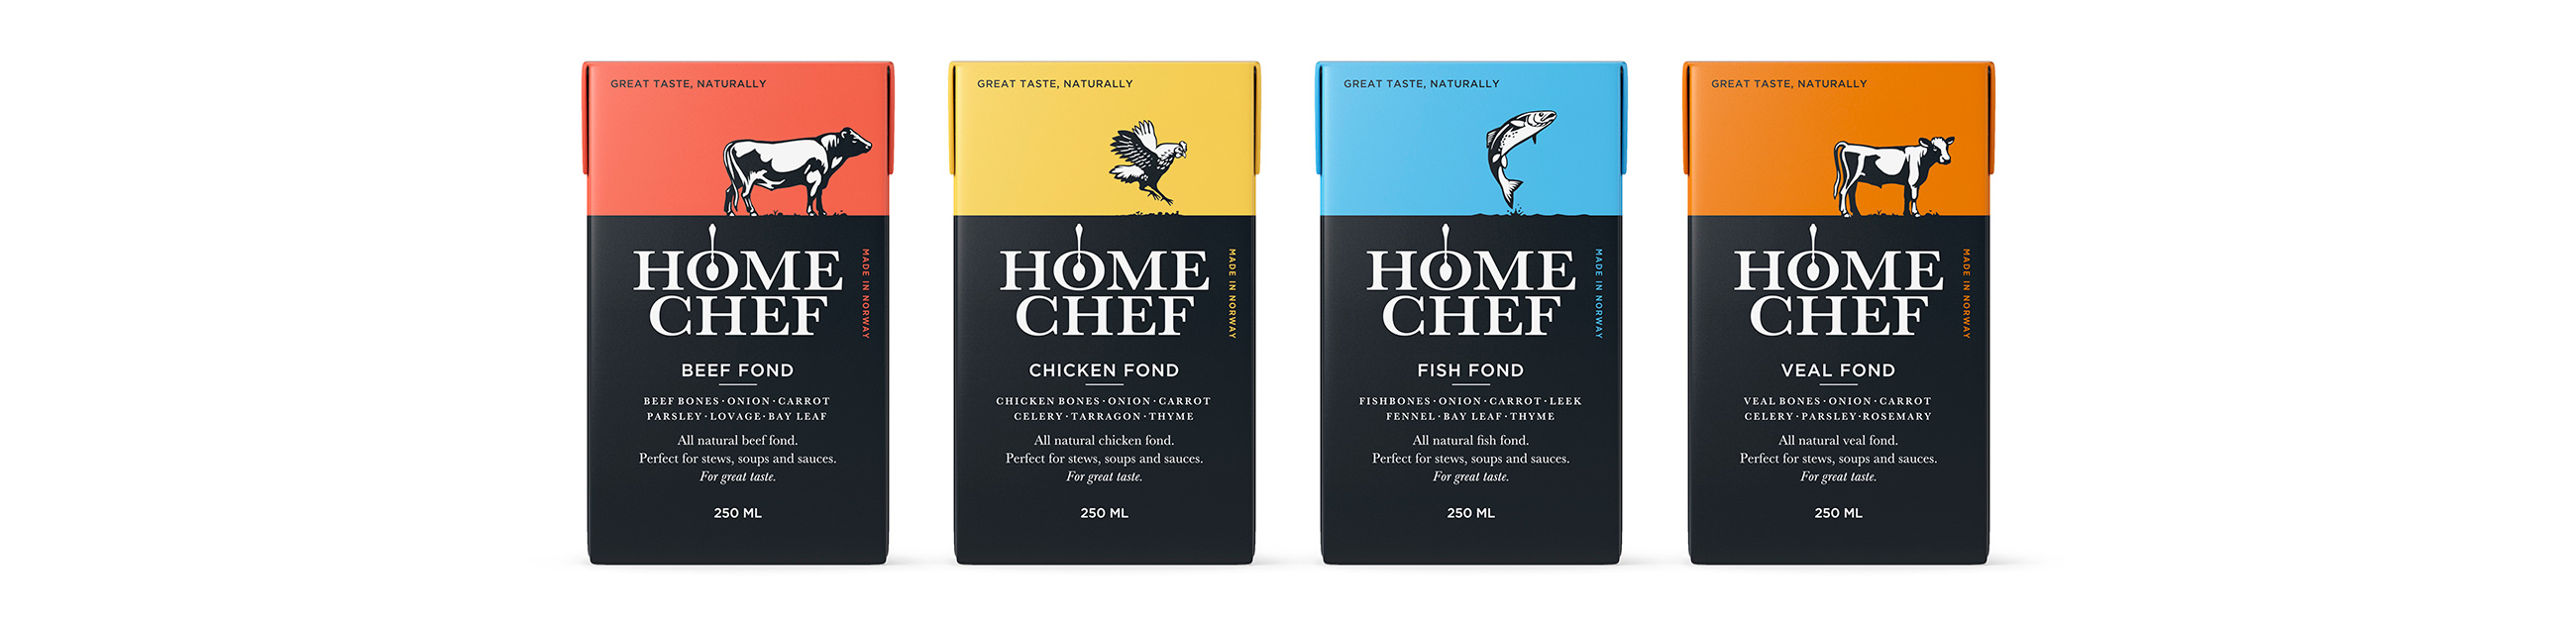 Salsus Home Chef Beef, chicken, fish and veal fond. Emballasje packaging design.